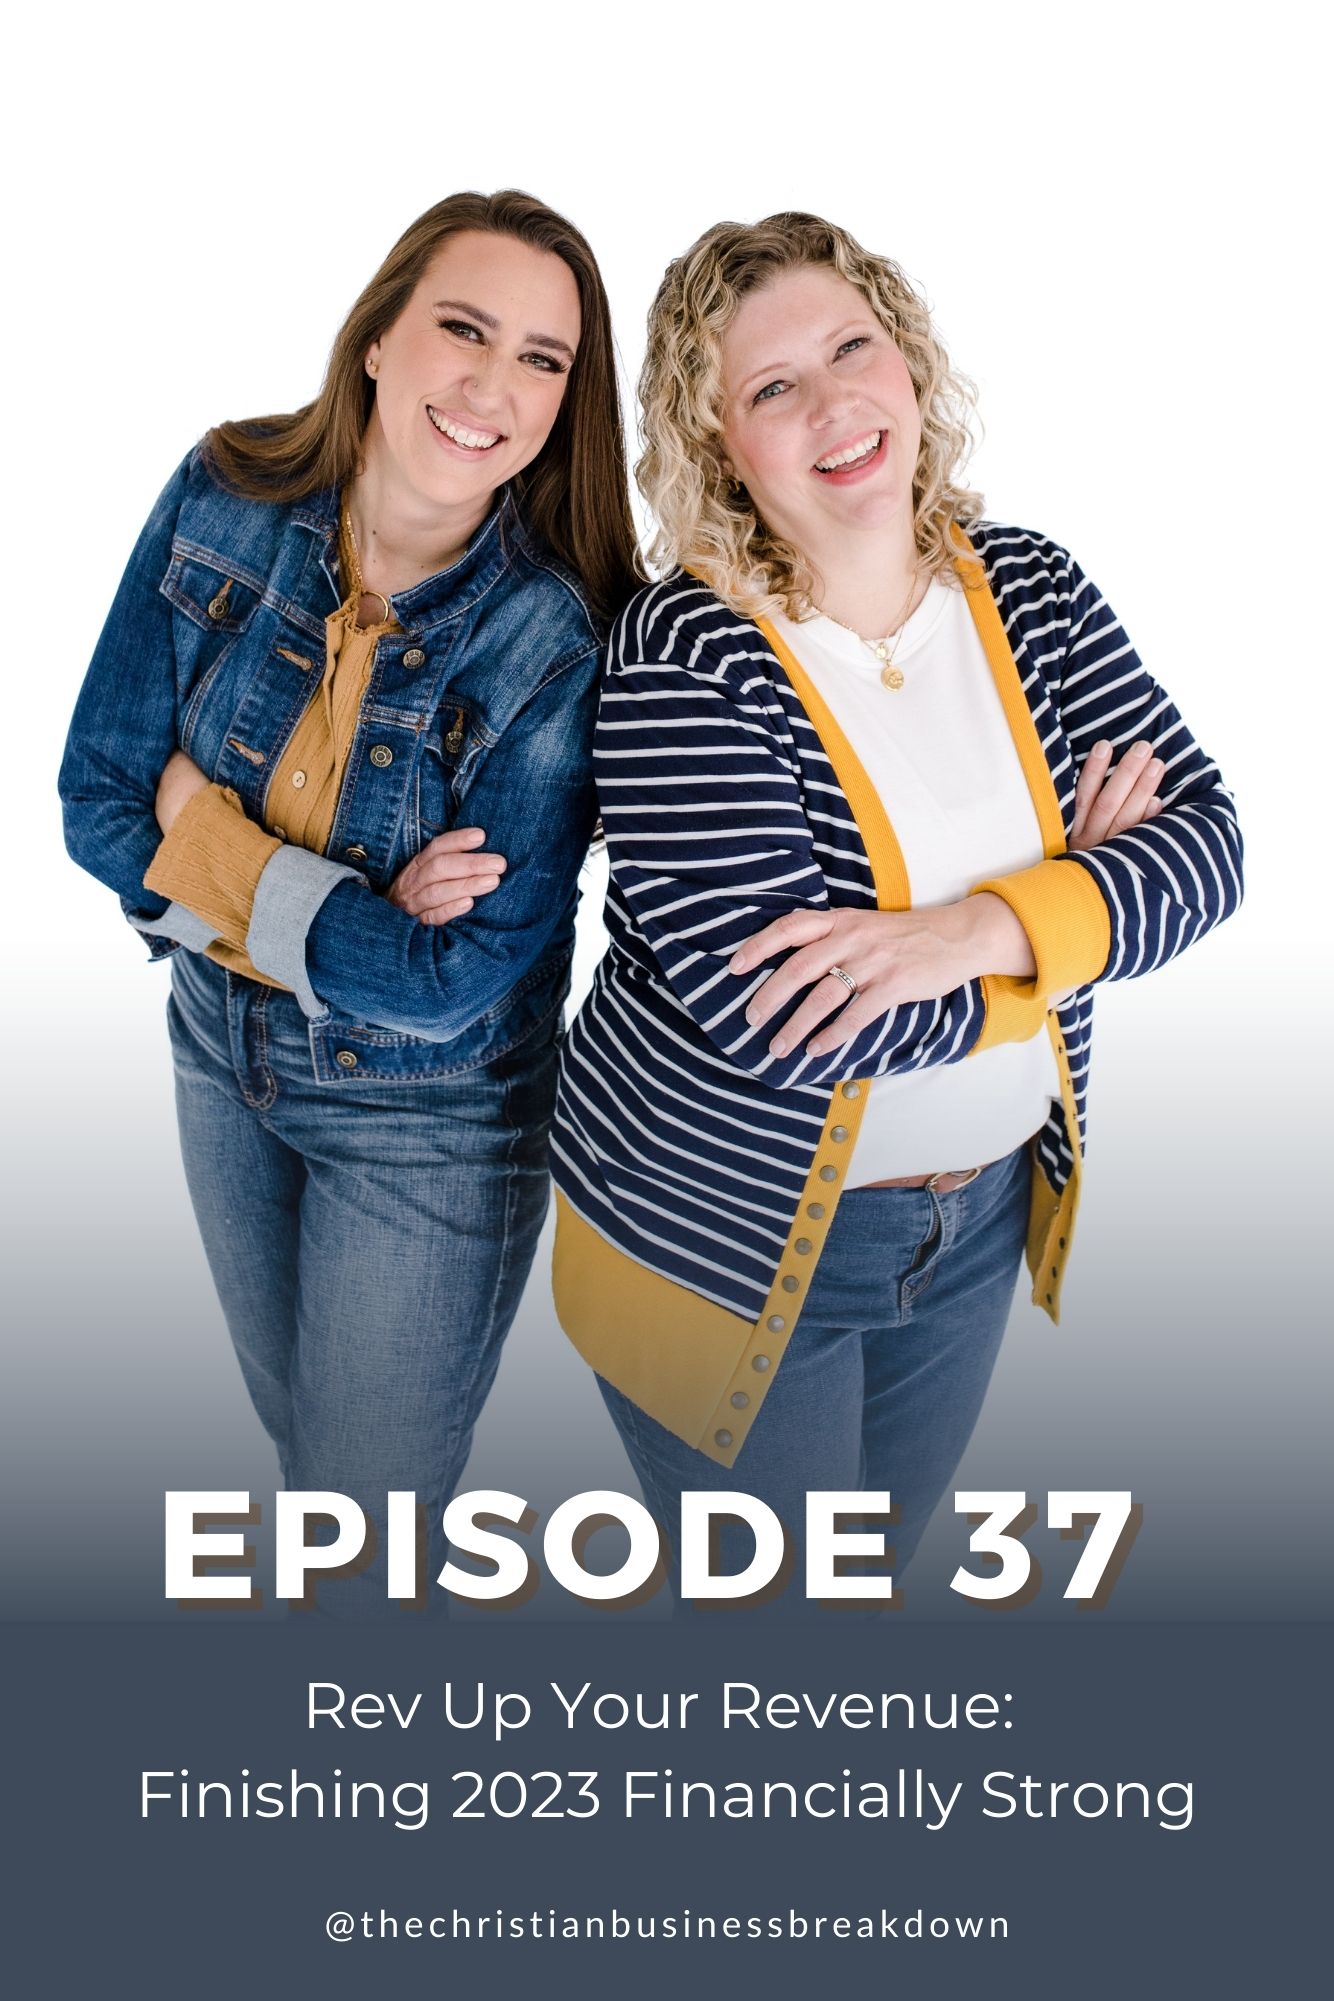 Two Christian women standing back to back with their arms closed talking about how to finish 2023 financially strong for their Christian business podcast for women.